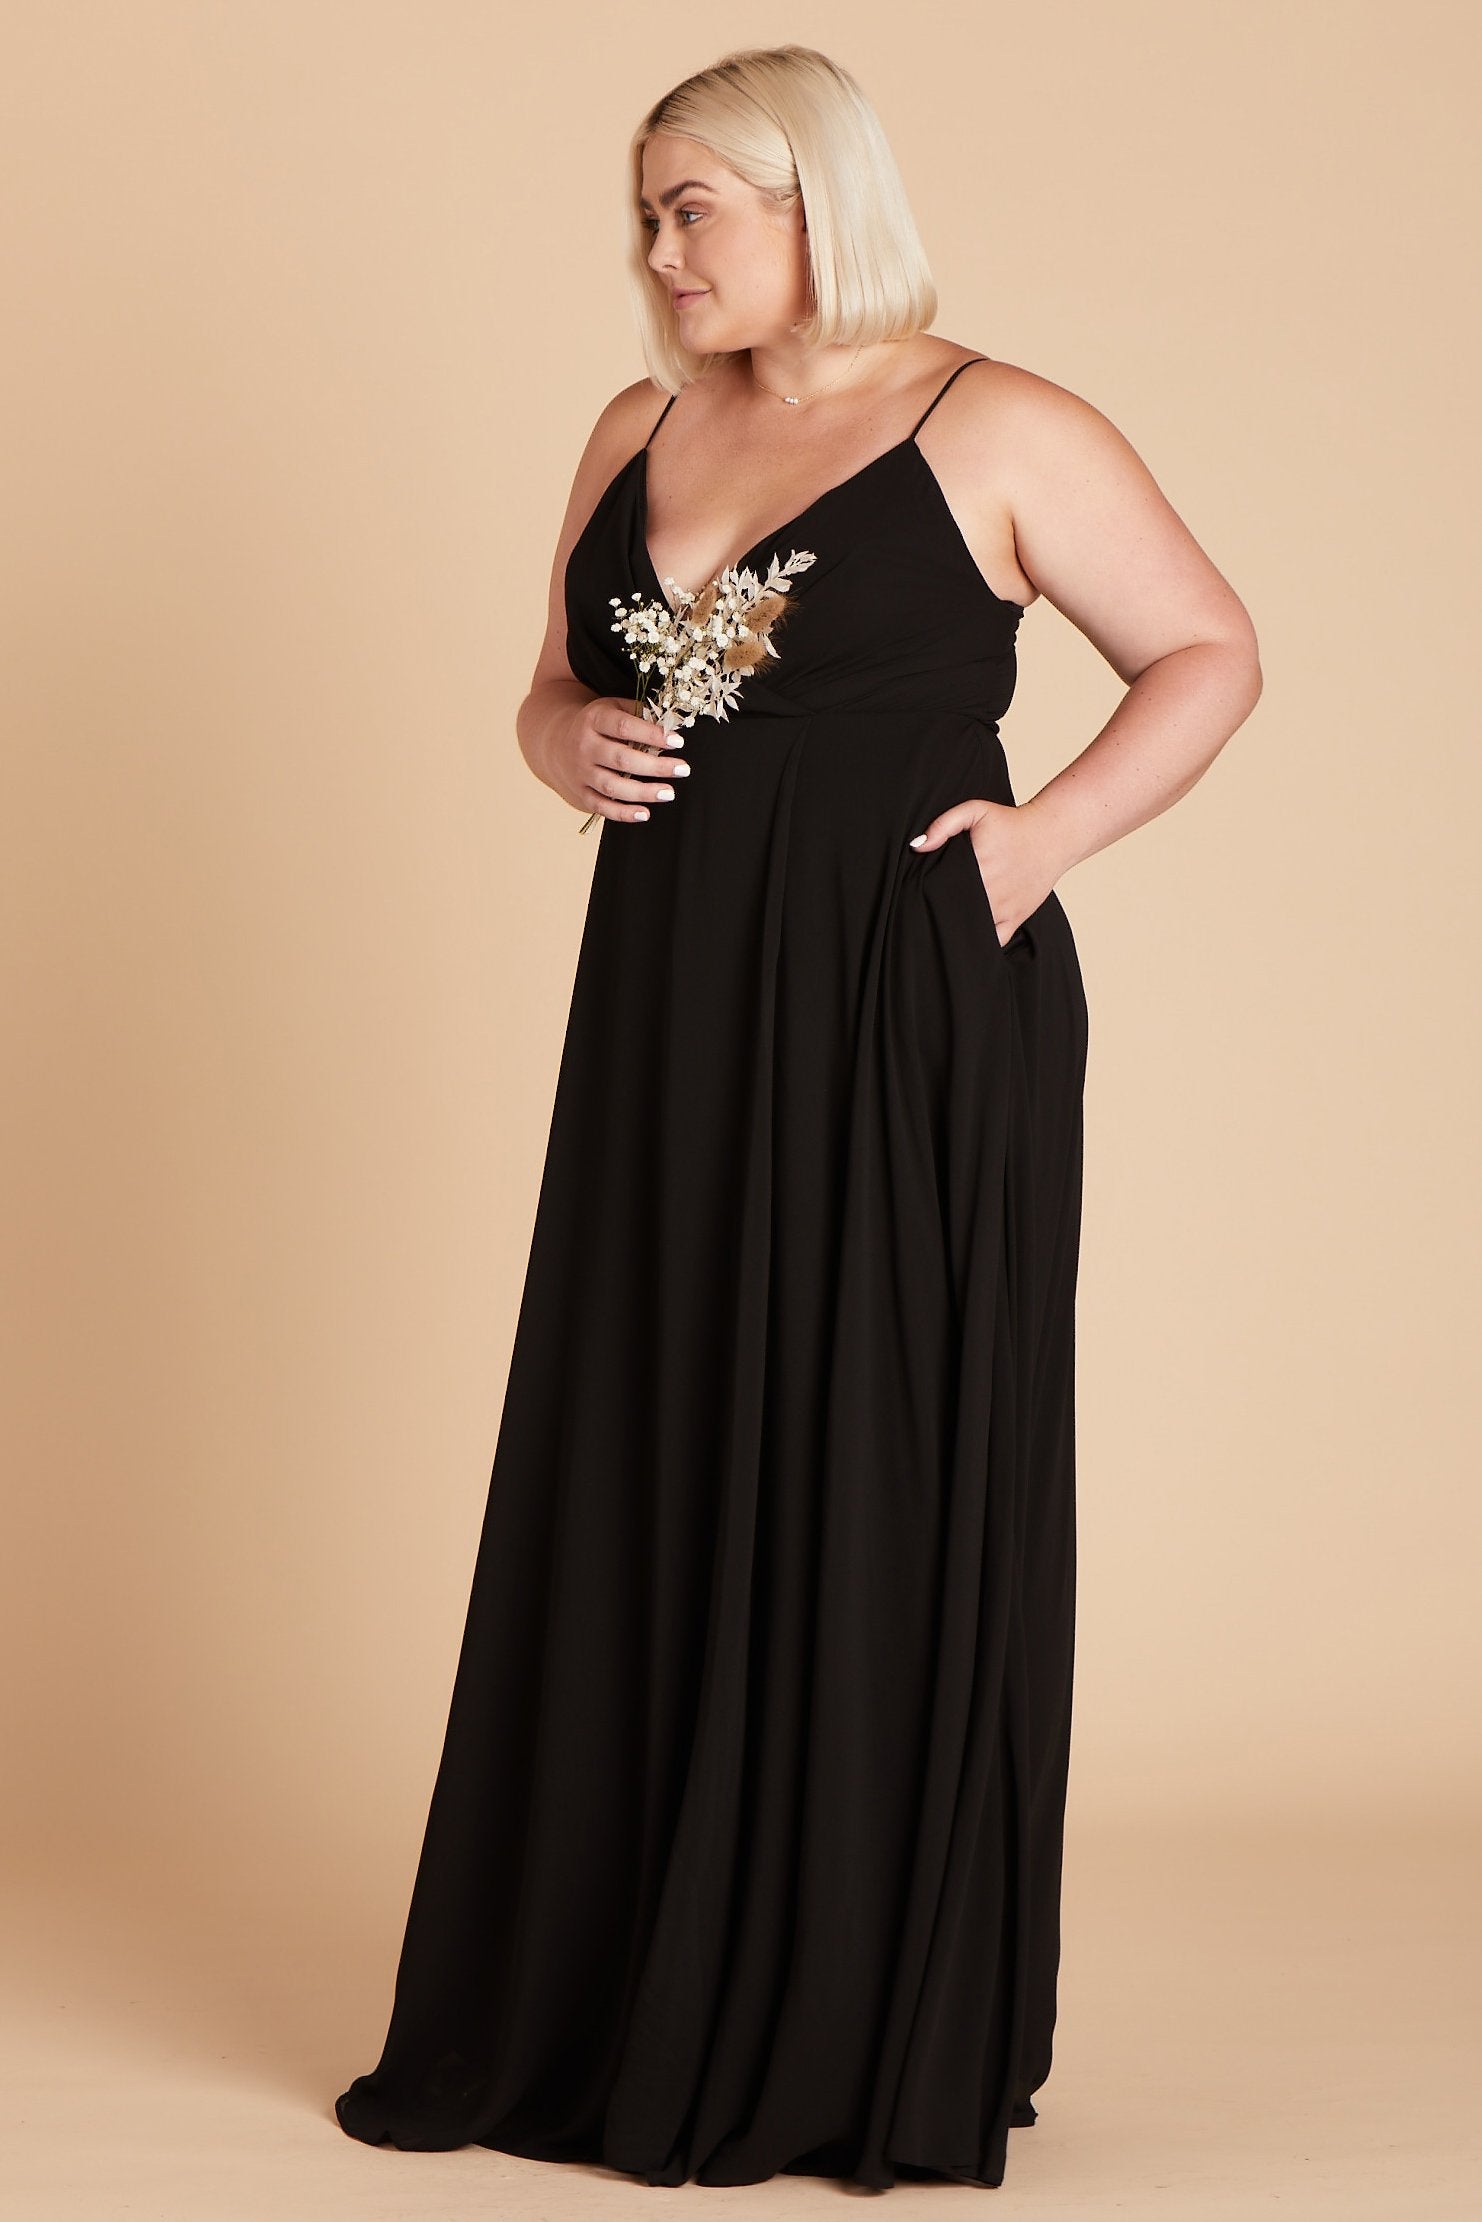 Kaia plus size bridesmaids dress in black chiffon by Birdy Grey, side view with hand in pocket